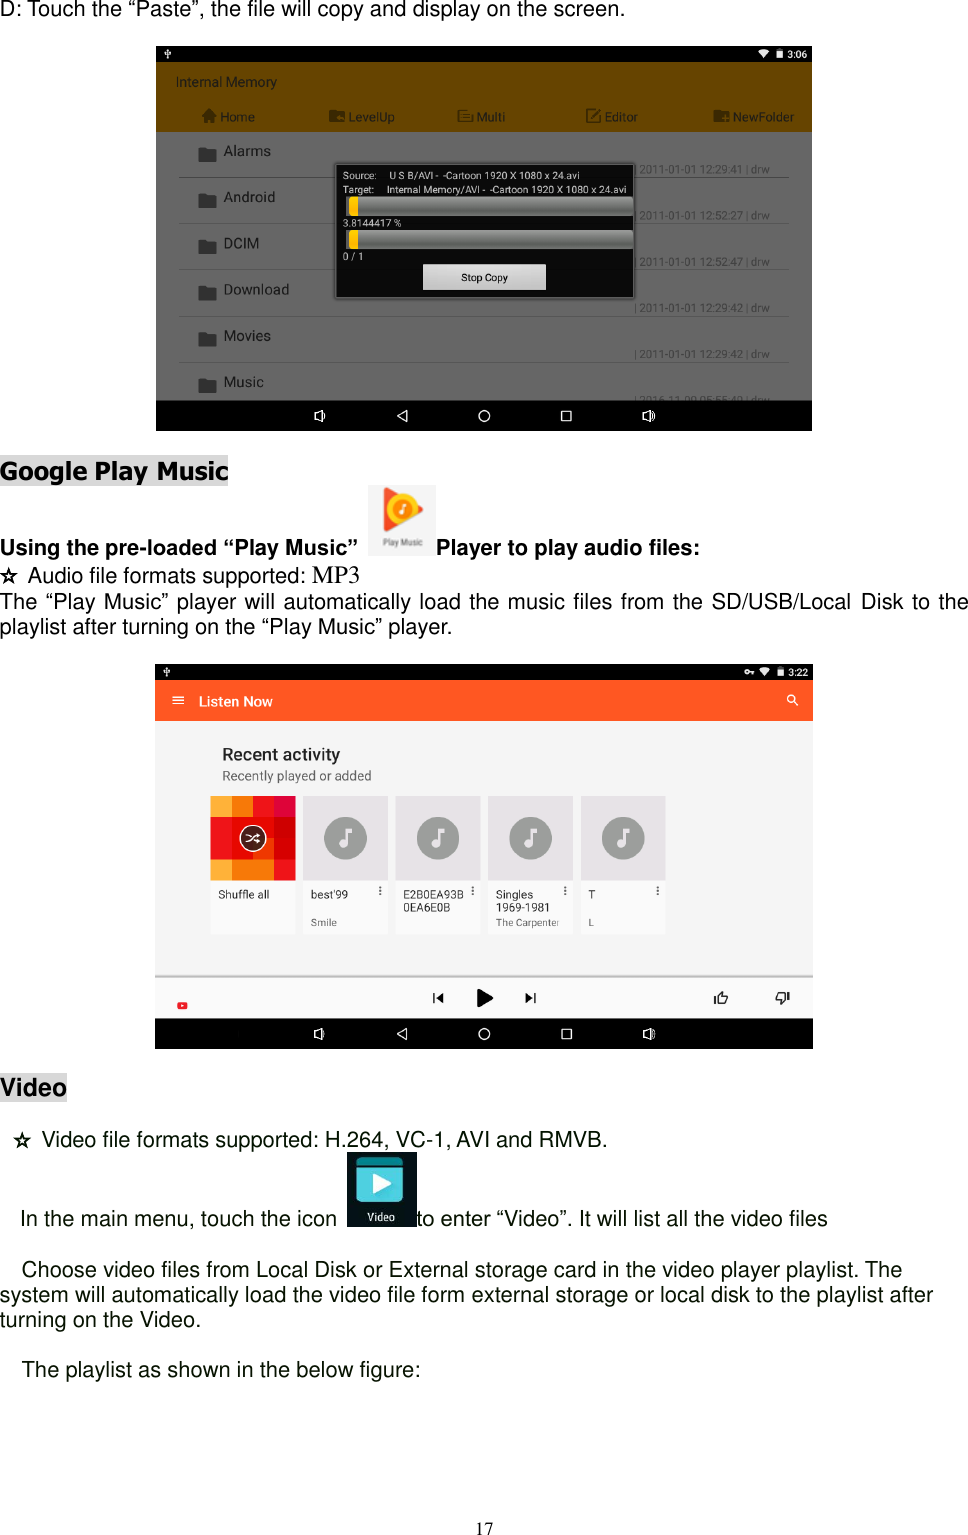  17  D: Touch the “Paste”, the file will copy and display on the screen.      Google Play Music                                                        Using the pre-loaded “Play Music”  Player to play audio files: ☆ Audio file formats supported: MP3 The “Play Music” player will automatically load the music files from the SD/USB/Local Disk to the playlist after turning on the “Play Music” player.     Video                                                                           ☆ Video file formats supported: H.264, VC-1, AVI and RMVB. In the main menu, touch the icon  to enter “Video”. It will list all the video files    Choose video files from Local Disk or External storage card in the video player playlist. The system will automatically load the video file form external storage or local disk to the playlist after turning on the Video.    The playlist as shown in the below figure:  